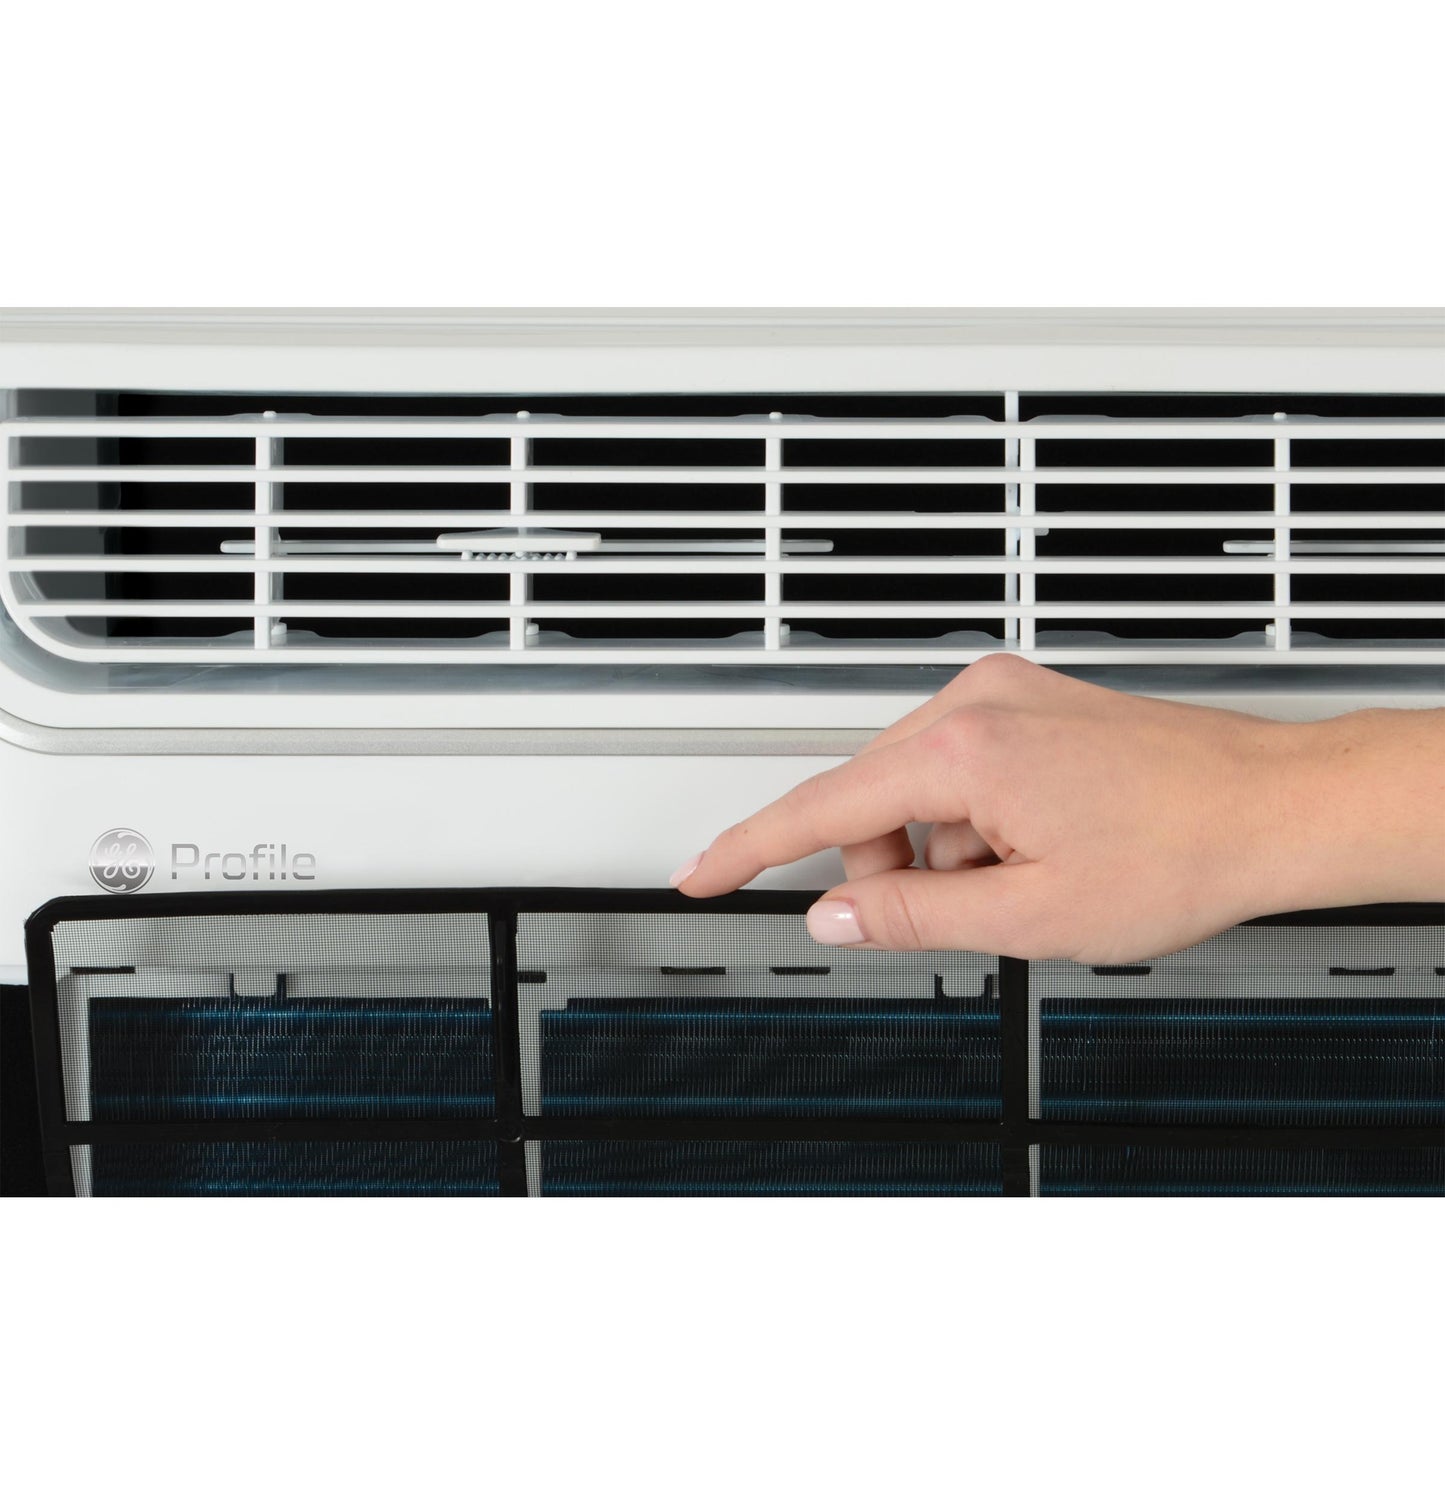 Ge Appliances AHTR14AC Ge Profile&#8482; 13,500 Btu Inverter Smart Ultra Quiet Window Air Conditioner For Large Rooms Up To 700 Sq. Ft., Energy Star®